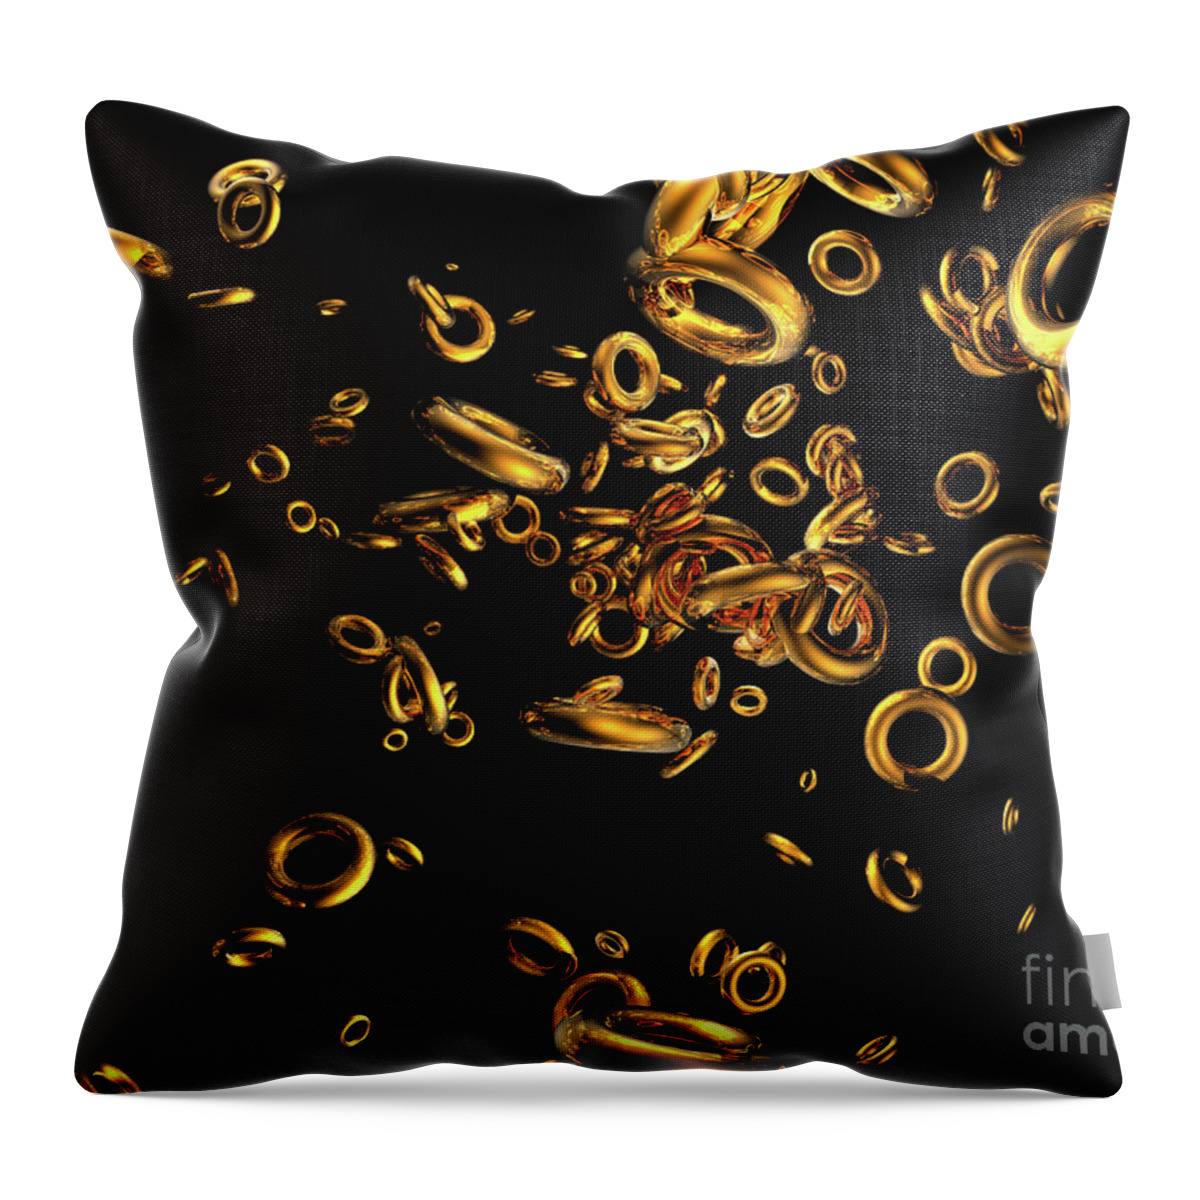 Surreal Throw Pillow featuring the digital art Brass Rings by Phil Perkins